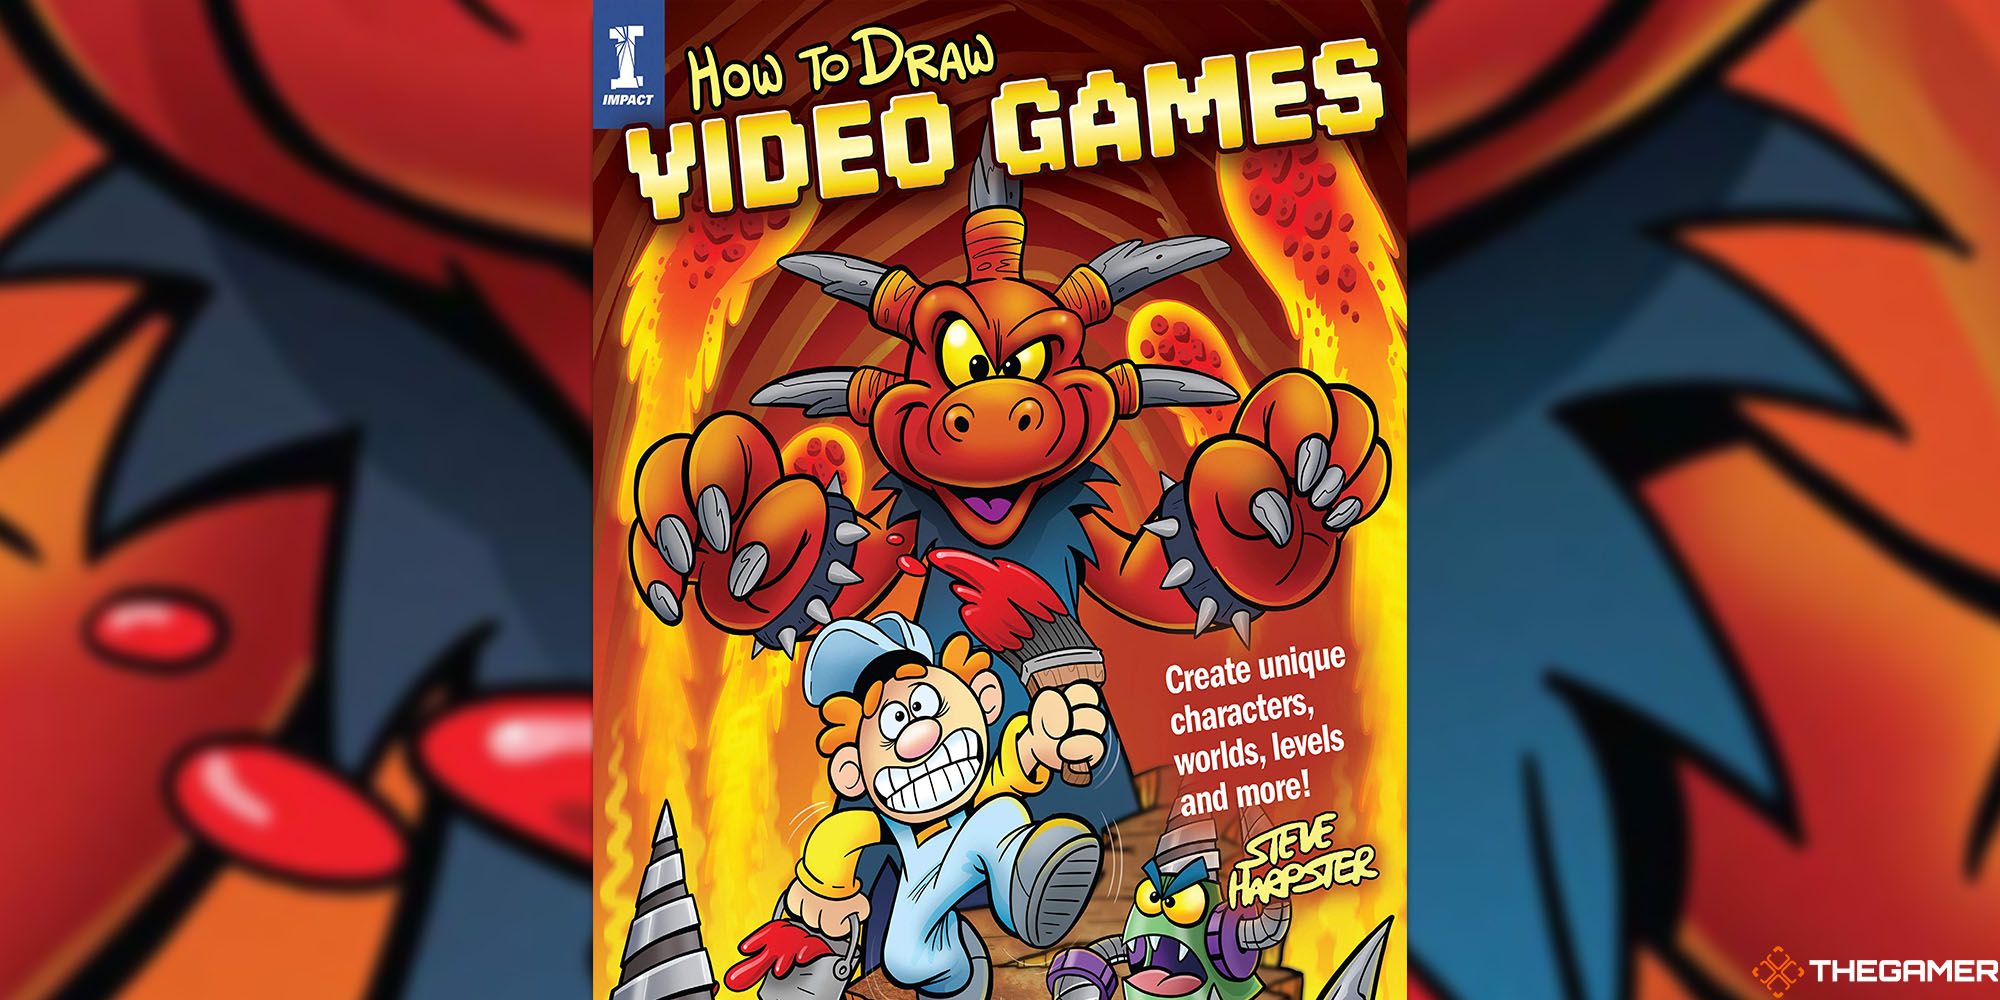 How To Draw Video Games Book